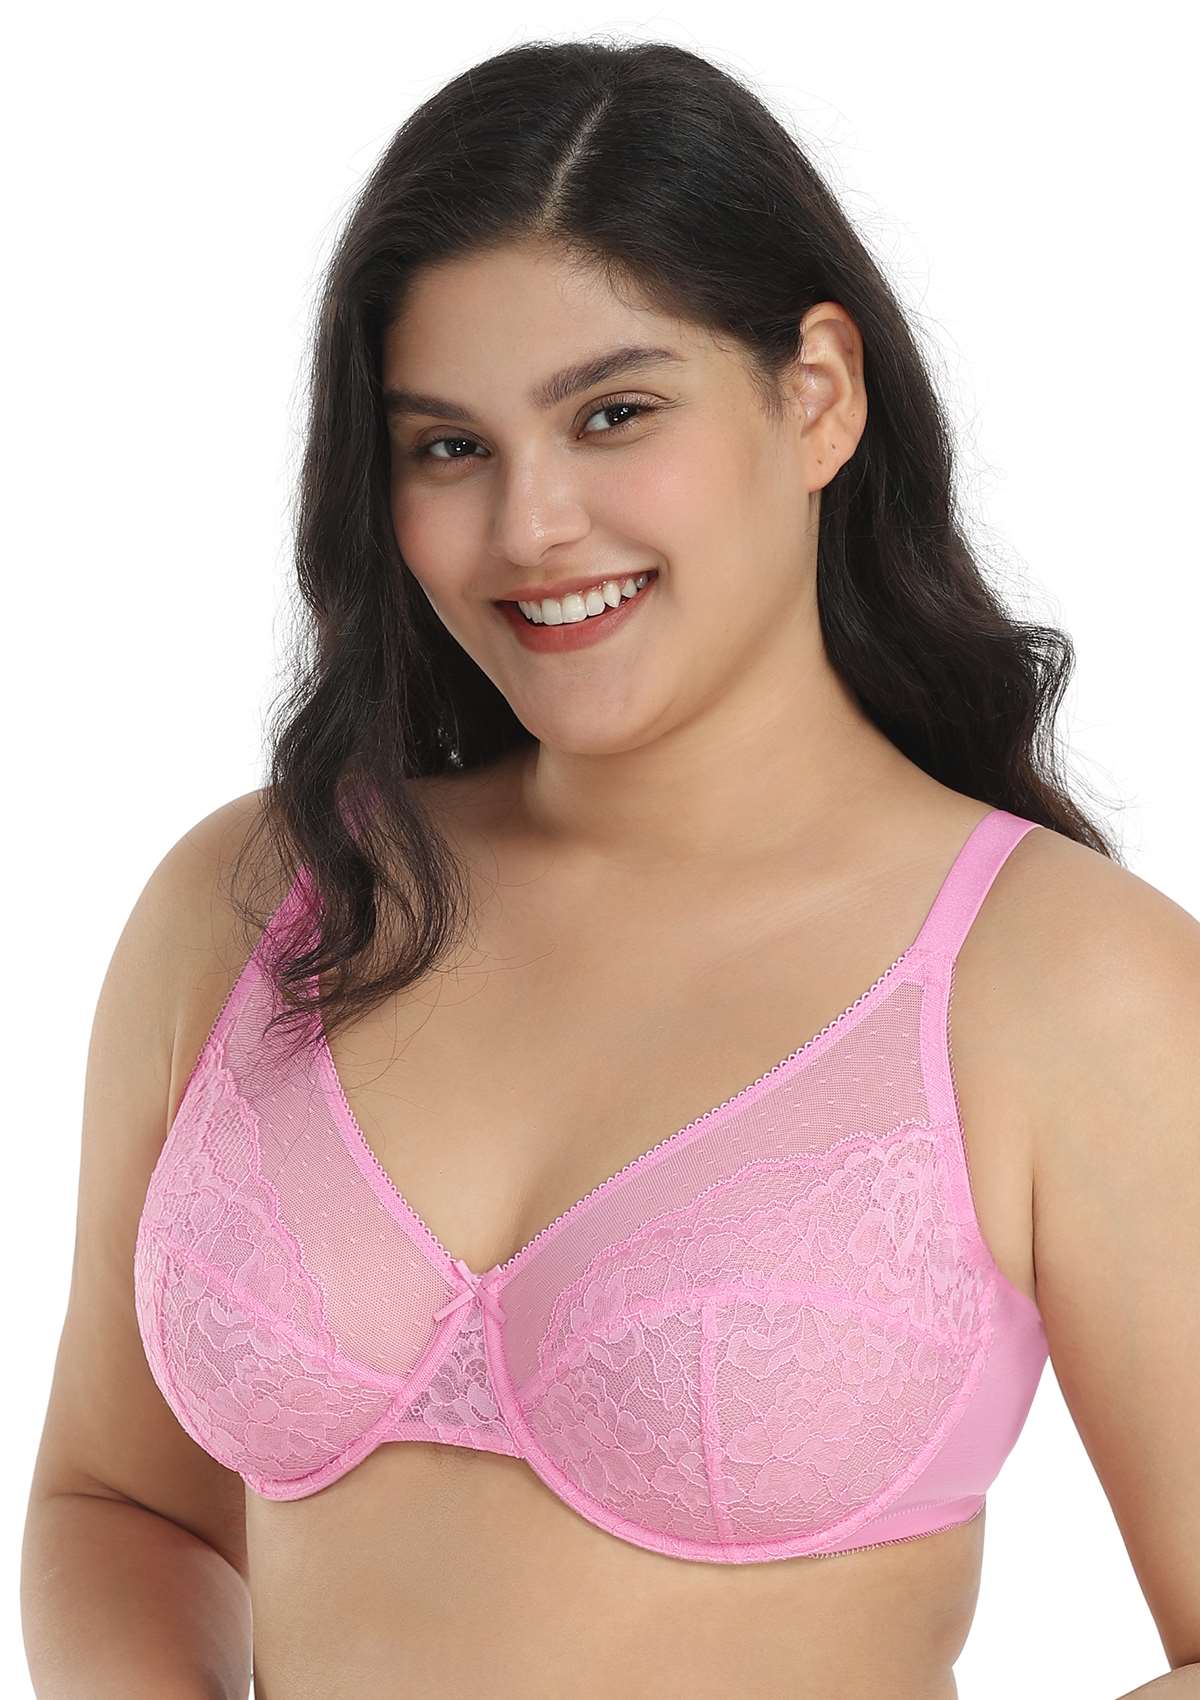 HSIA Enchante Lacy Bra: Comfy Sheer Lace Bra With Lift - Dusty Peach / 46 / D